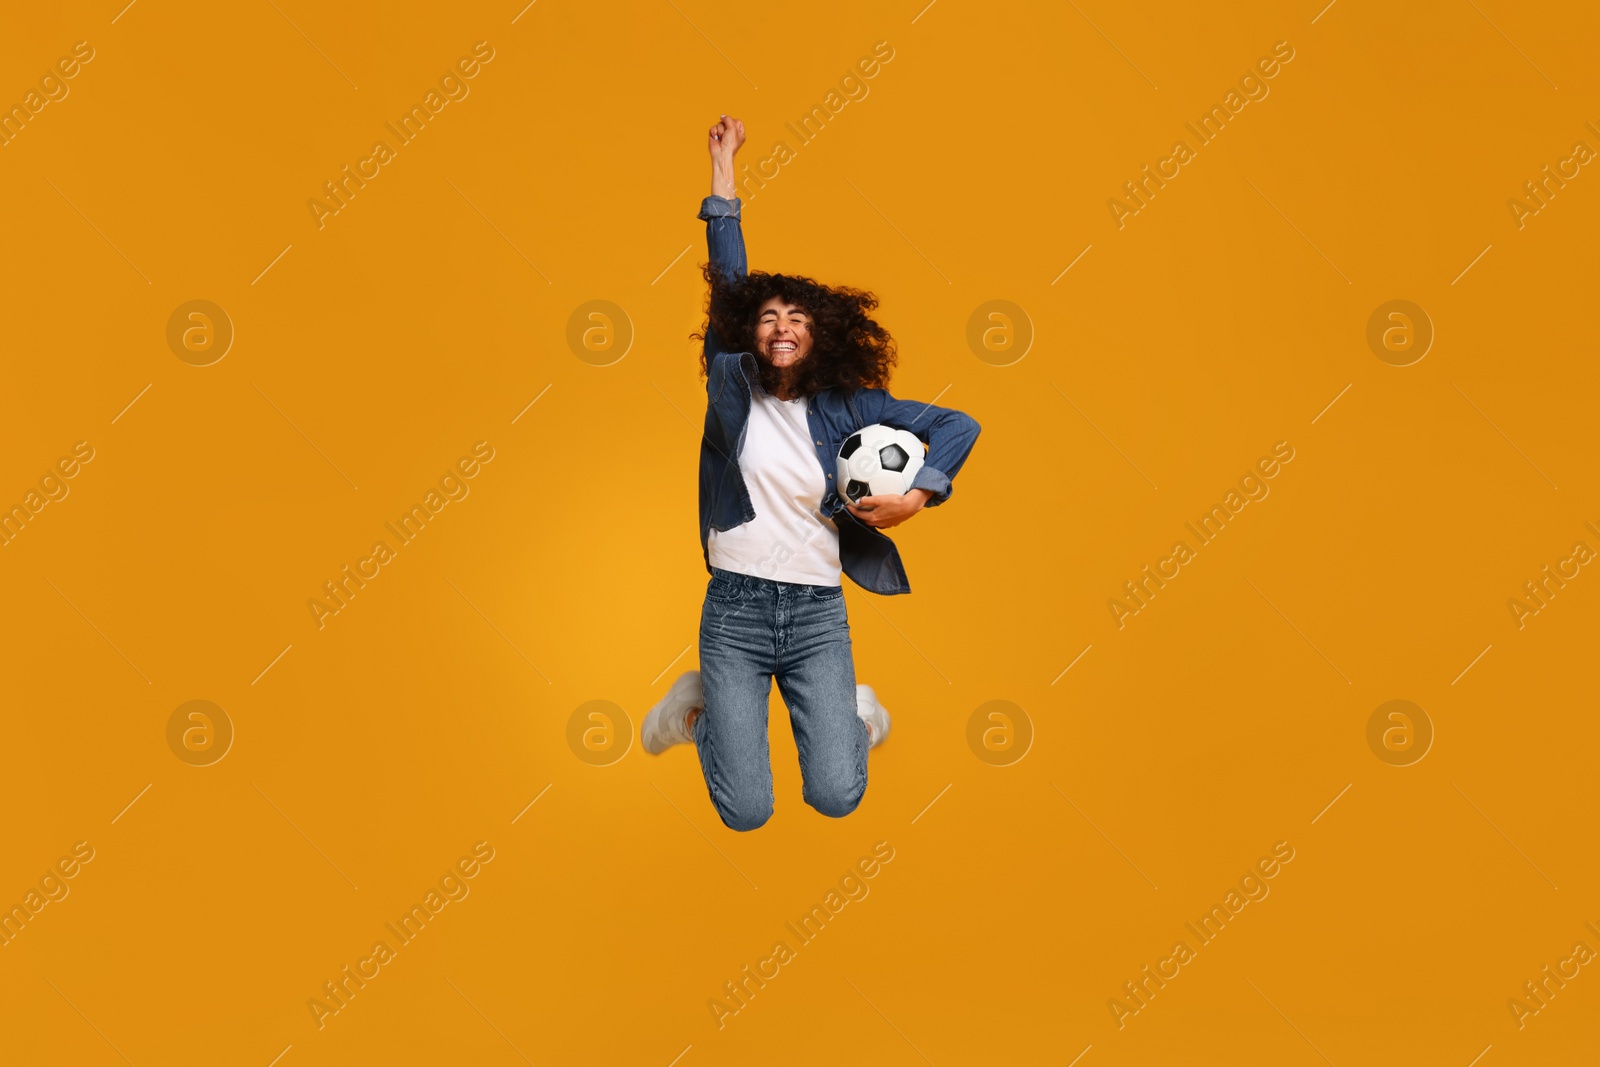 Photo of Happy fan with soccer ball jumping on yellow background